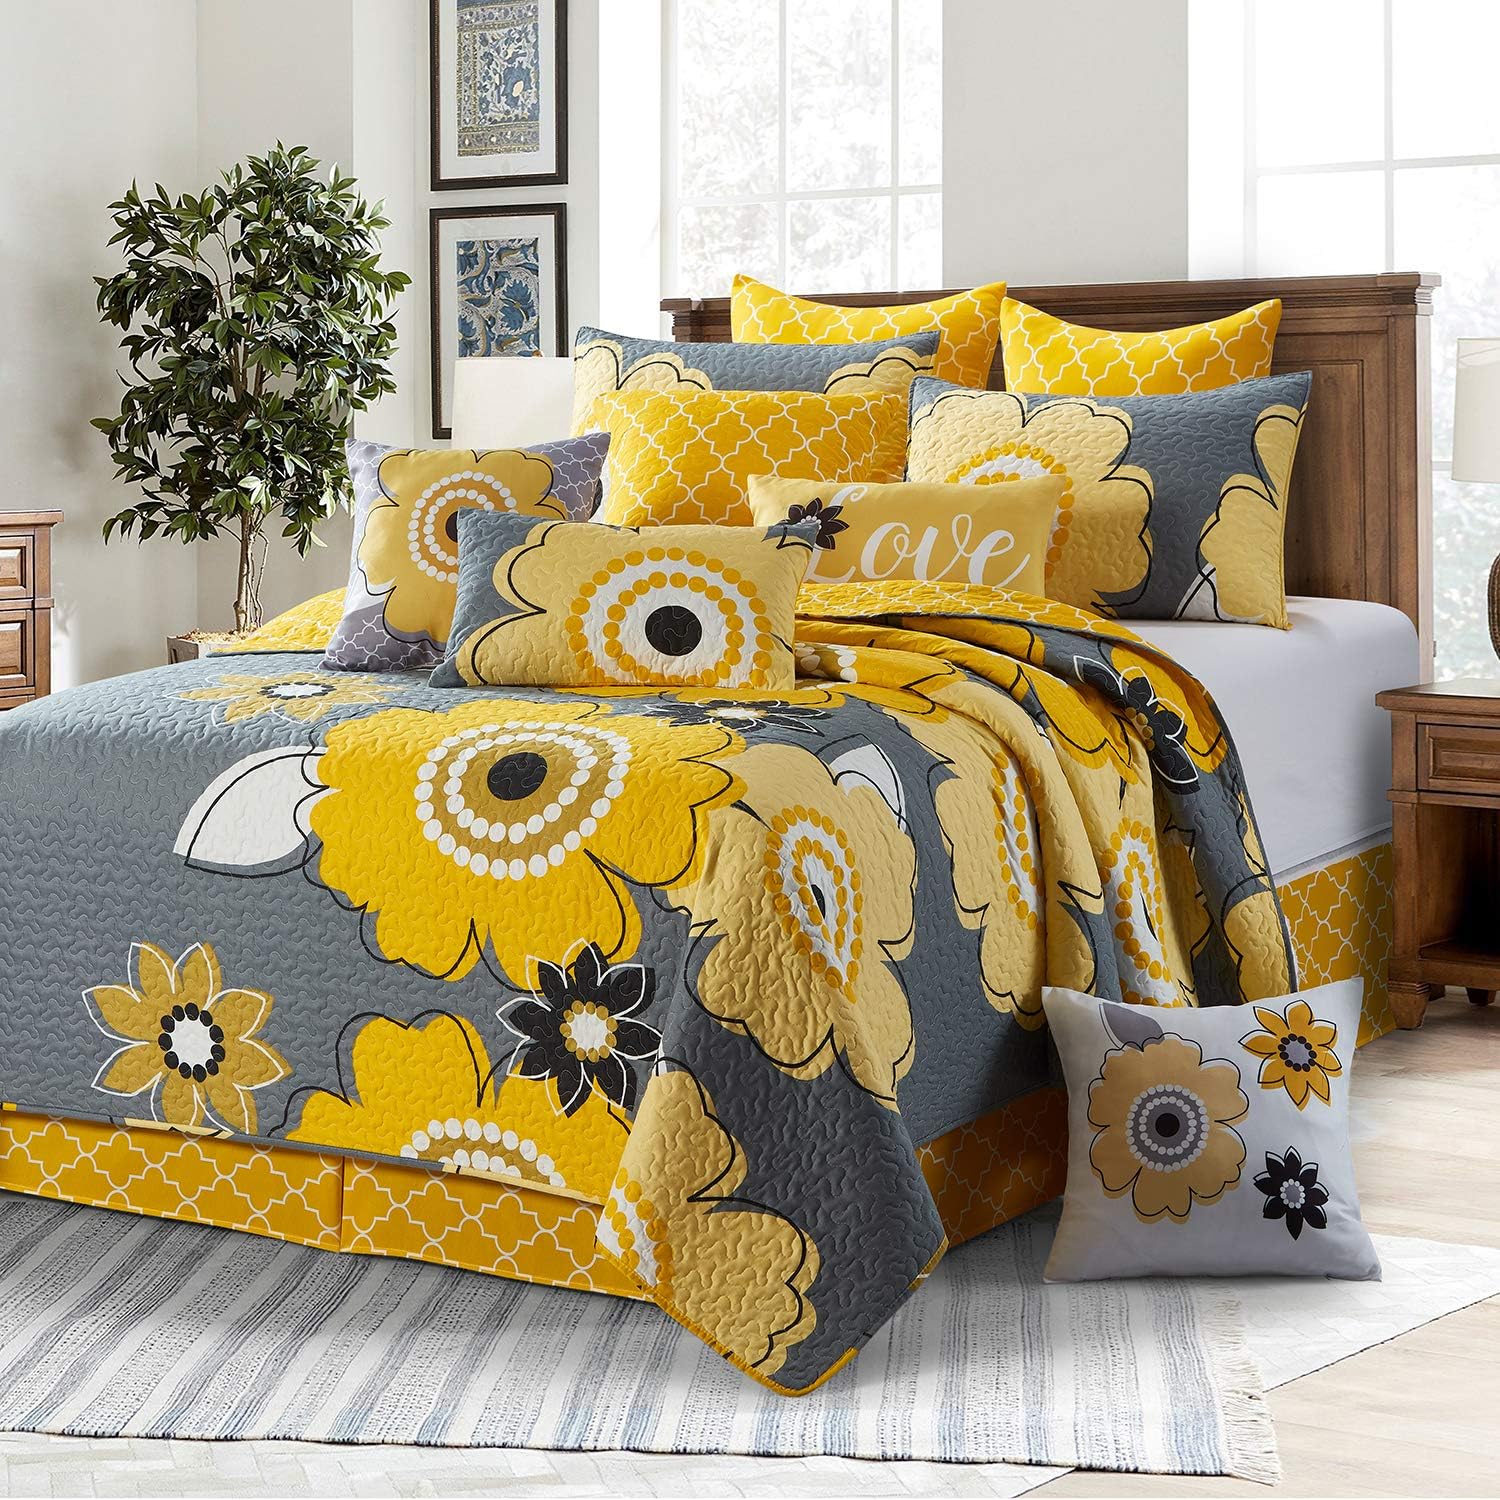 Virah Bella Quilt Bedding Set in King Francesca Yellow/Gray Printed Lightweight Reversible Quilt with 2 Matching Pillow Shams - Cozy & Beautiful Contemporary-Themed Bedding